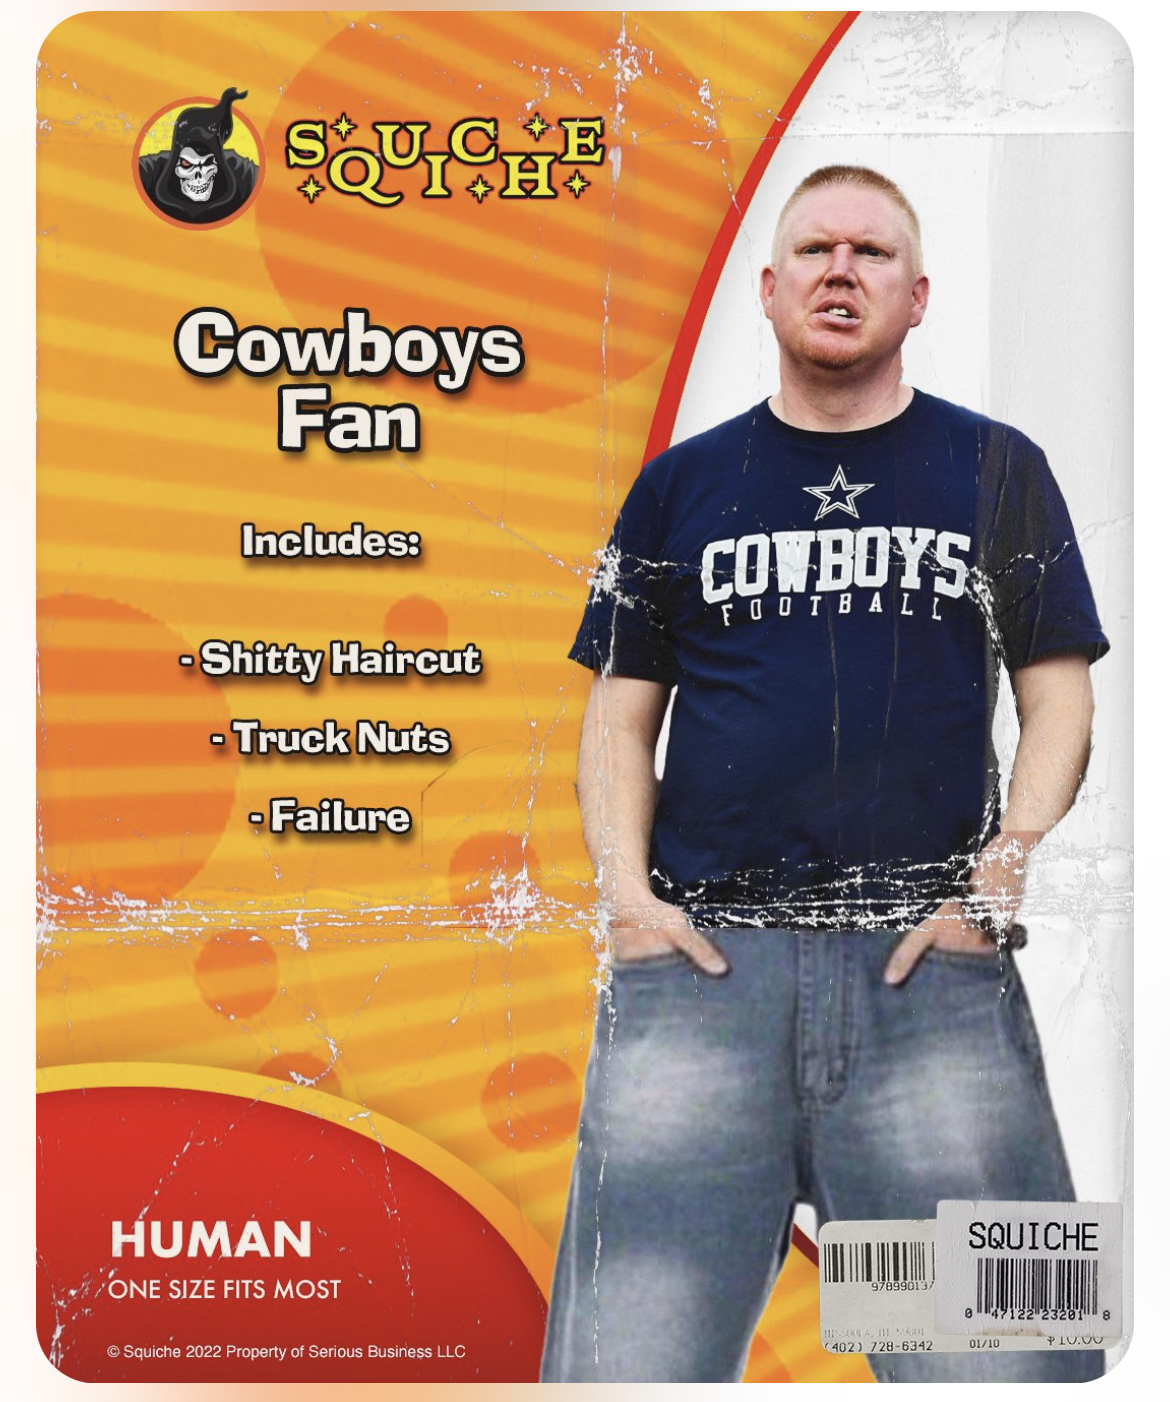 Costume Memes - t shirt - To Squiche Cowboys Fan Includes Shitty Haircut Truck Nuts Failure Human One Size Fits Most Squiche 2022 Property of Serious Business Llc Cowboys Football 7899013 Issarna, Iako 402 7286342 Squiche 8 47122 23201 8 P10.00 0110